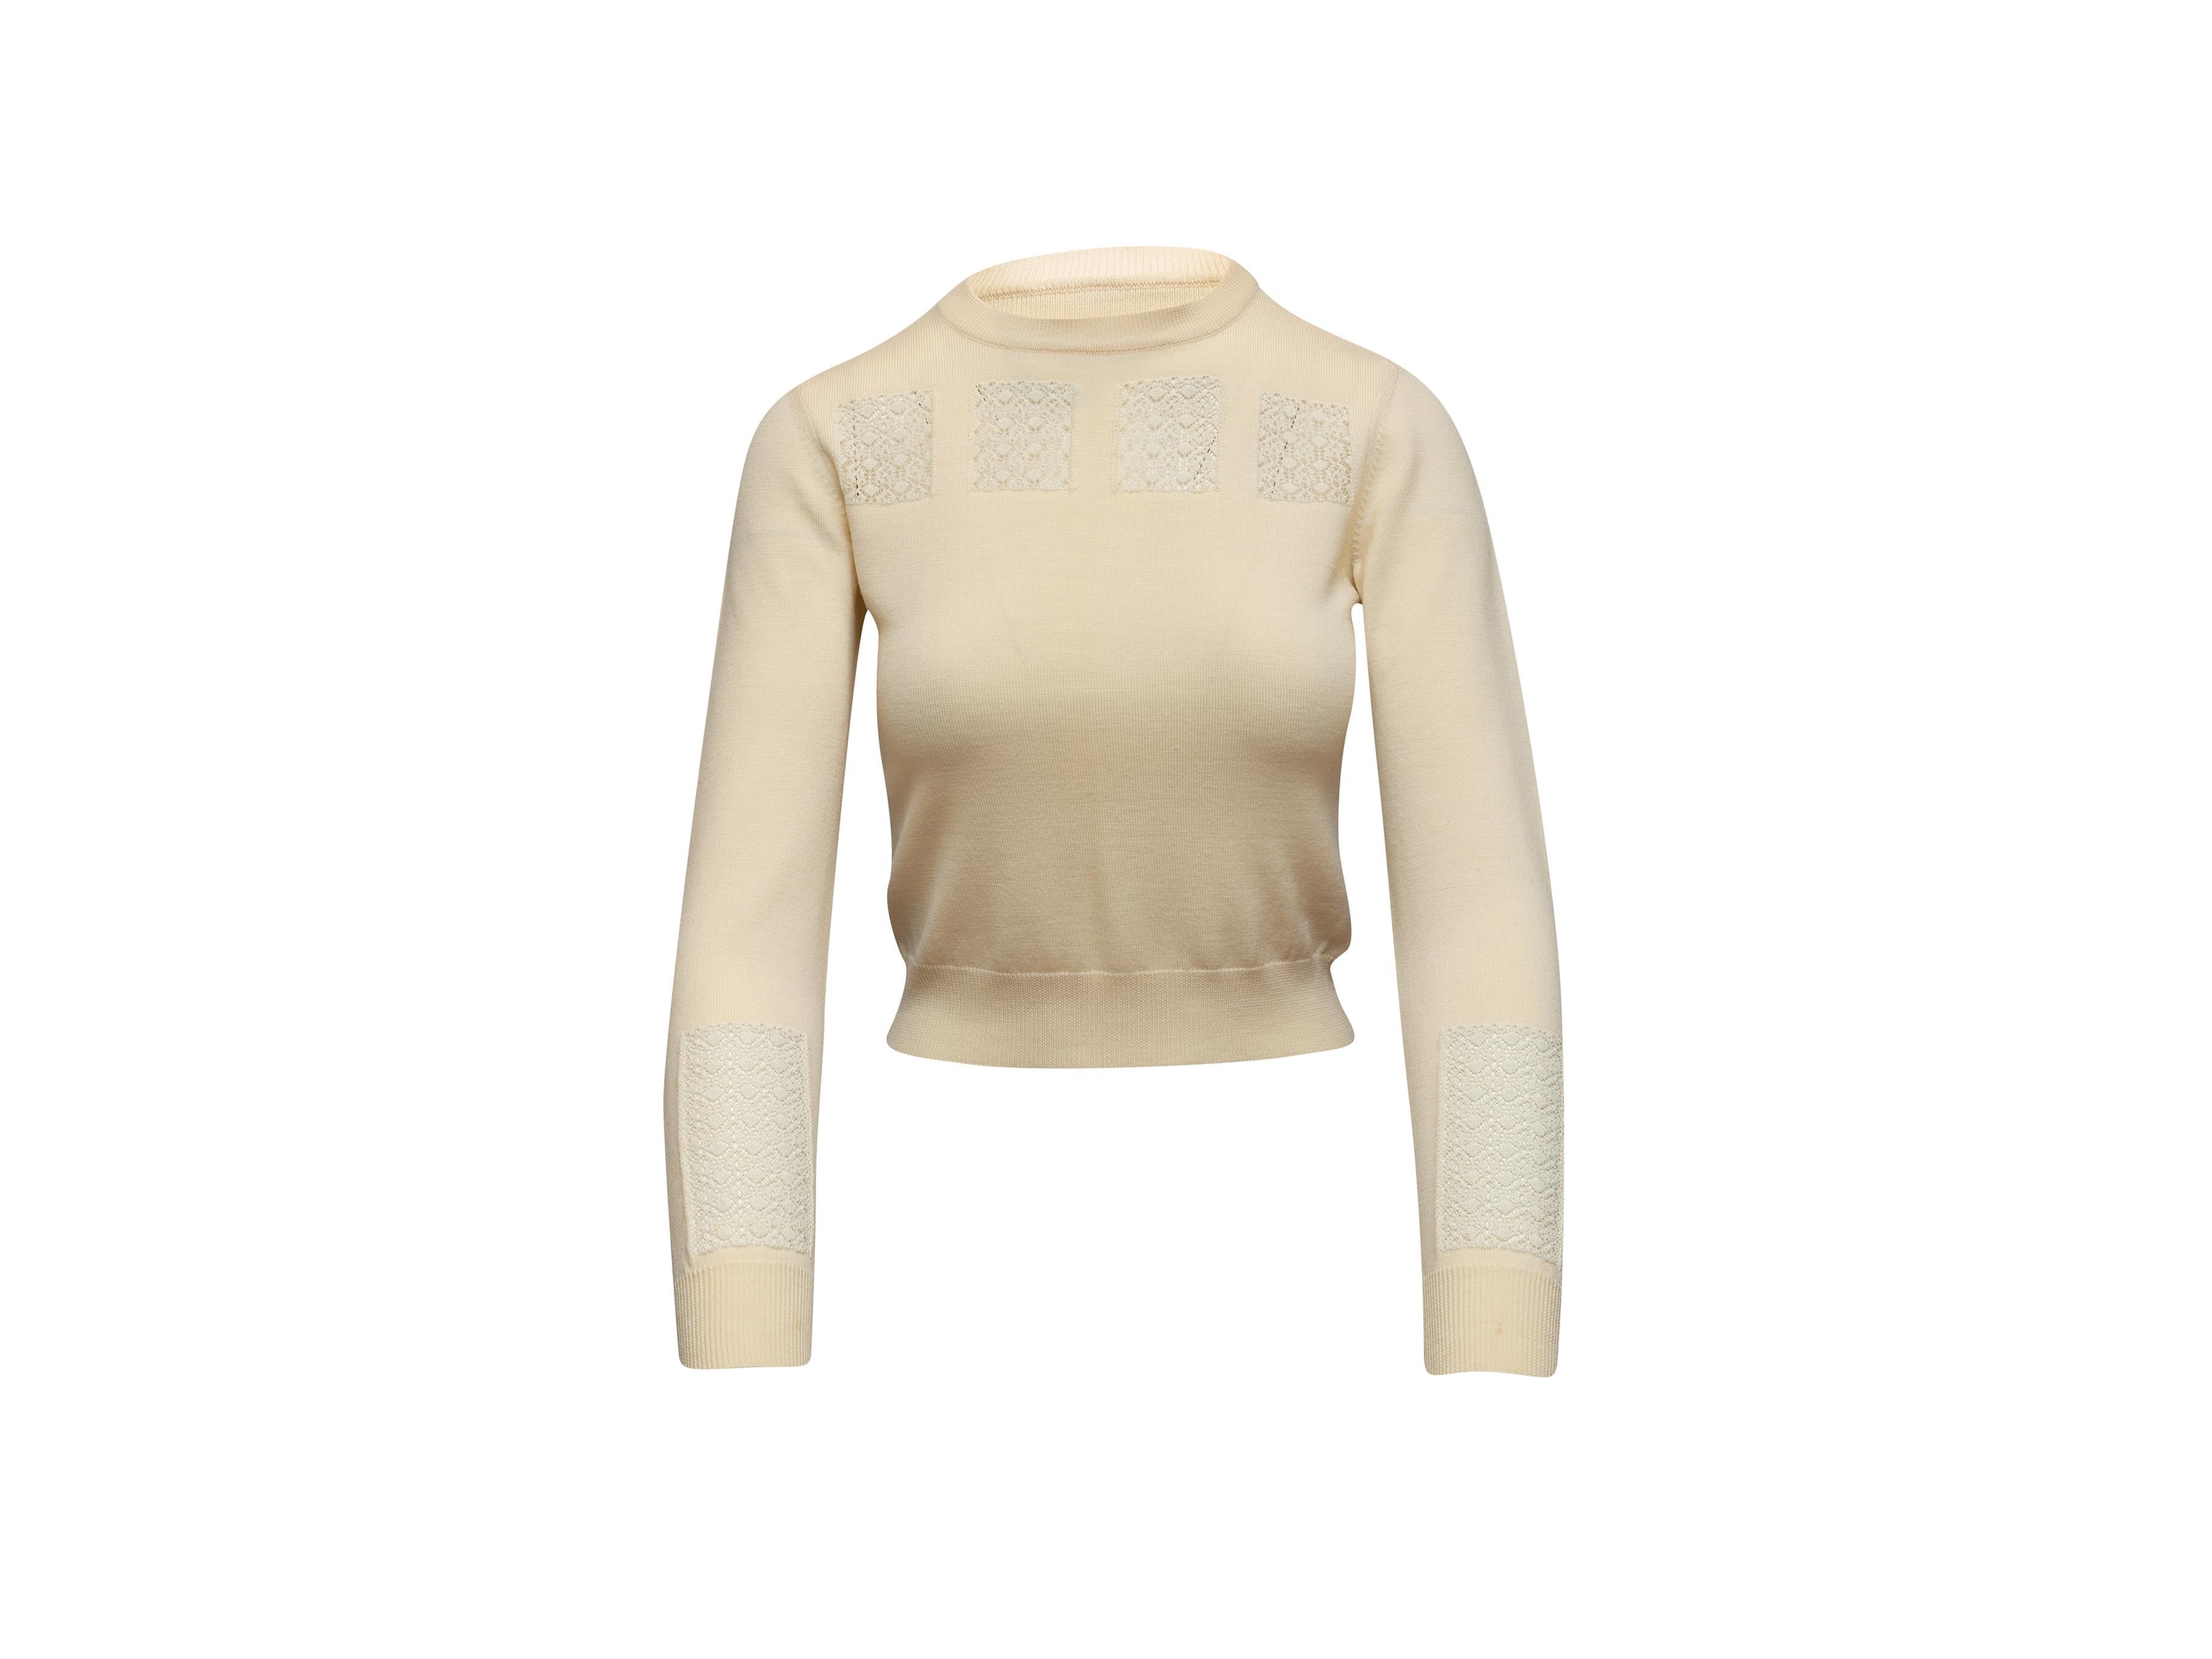 Beige Alaia Cream Virgin Wool Lace-Accented Sweater